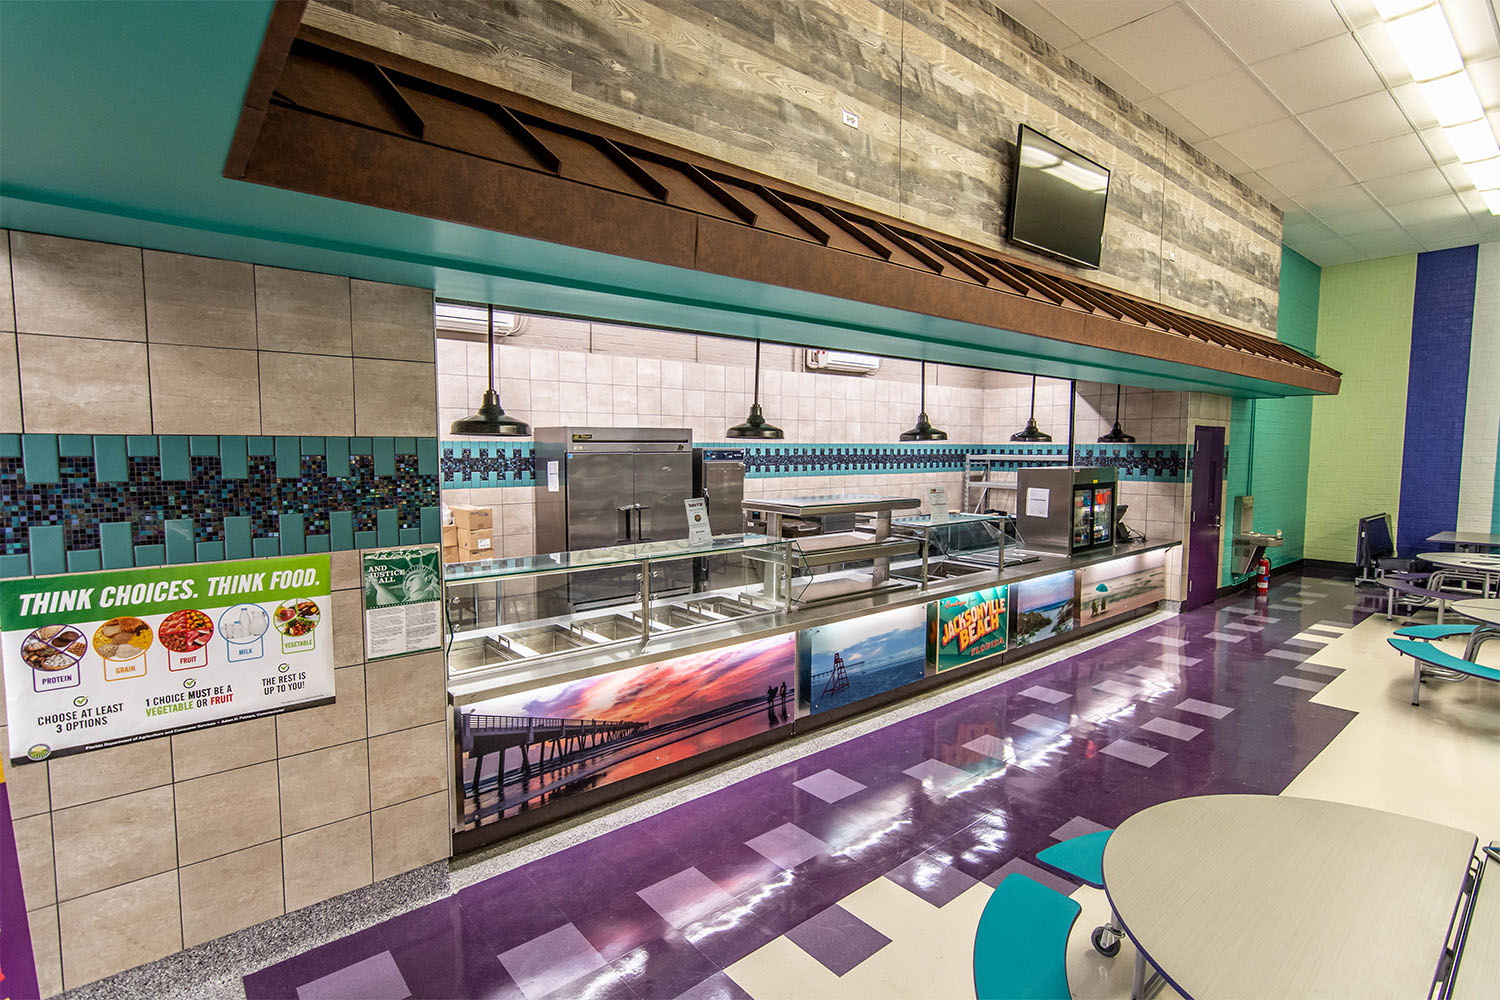 Serving line in student cafeteria with beachy posters and graphics